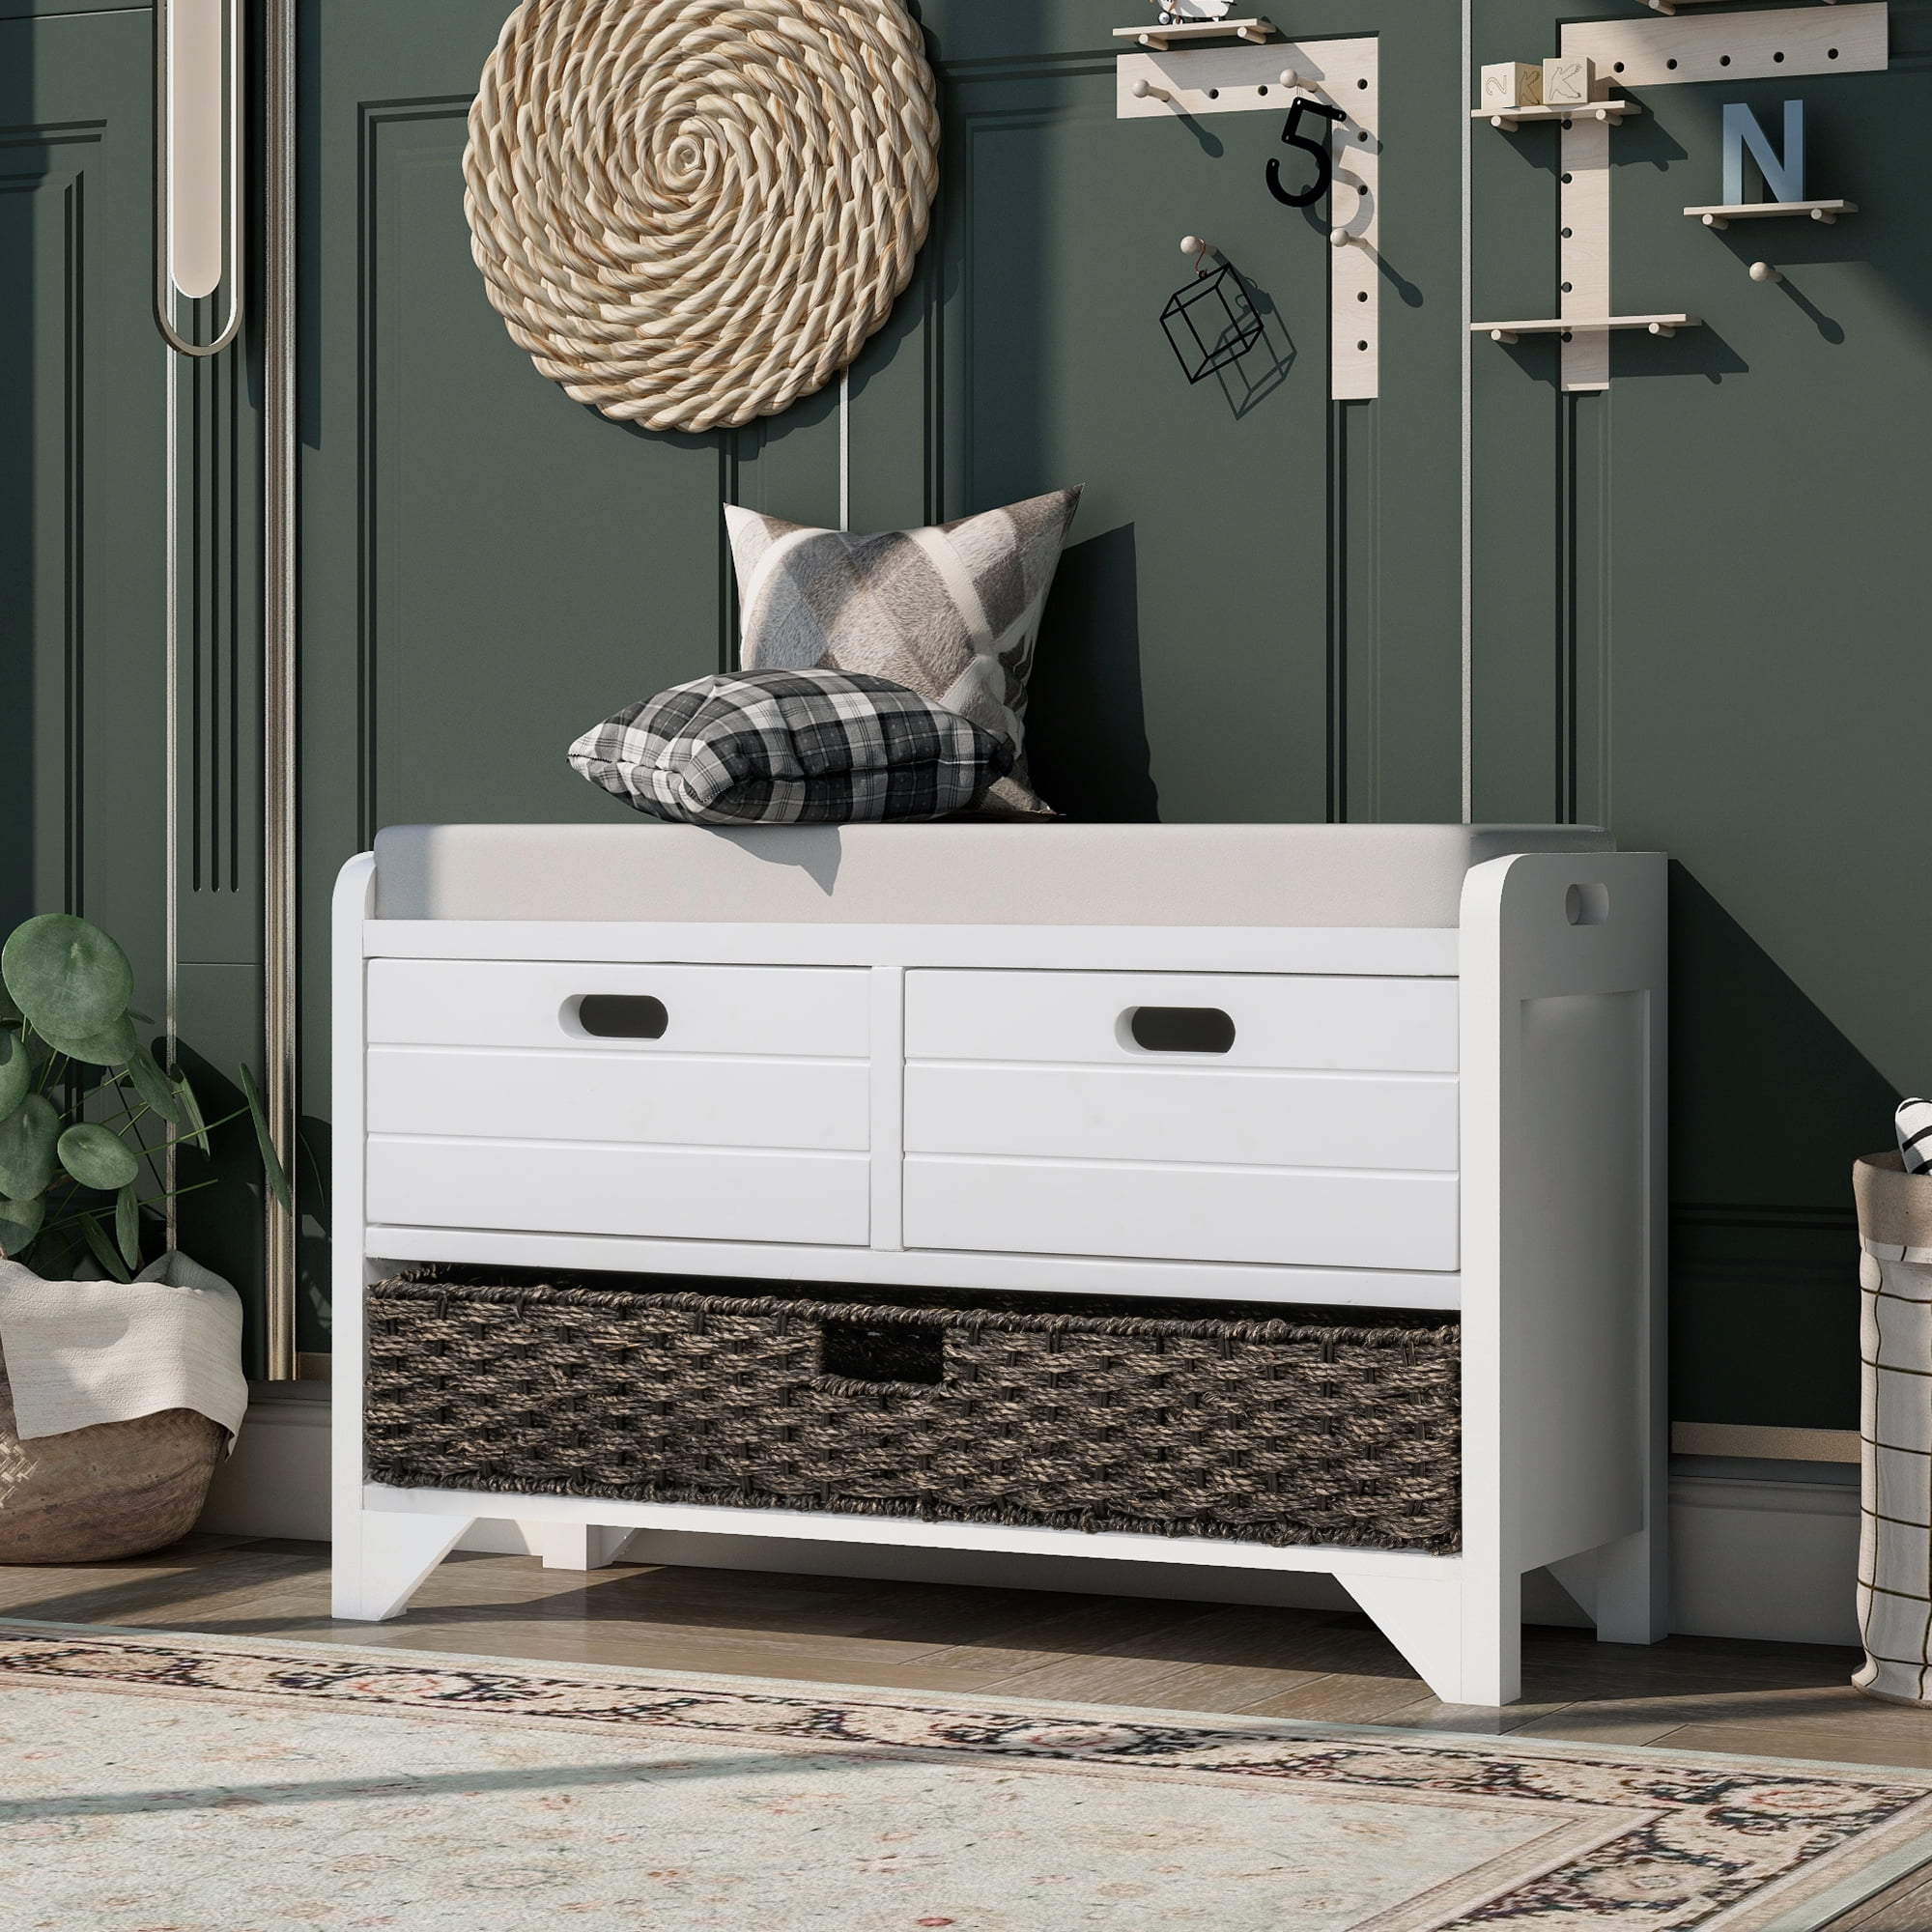 Harper & Bright Designs Espresso Entryway Storage Bench with Removable Cushion and 3-Removable Classic Fabric Basket, Espressp